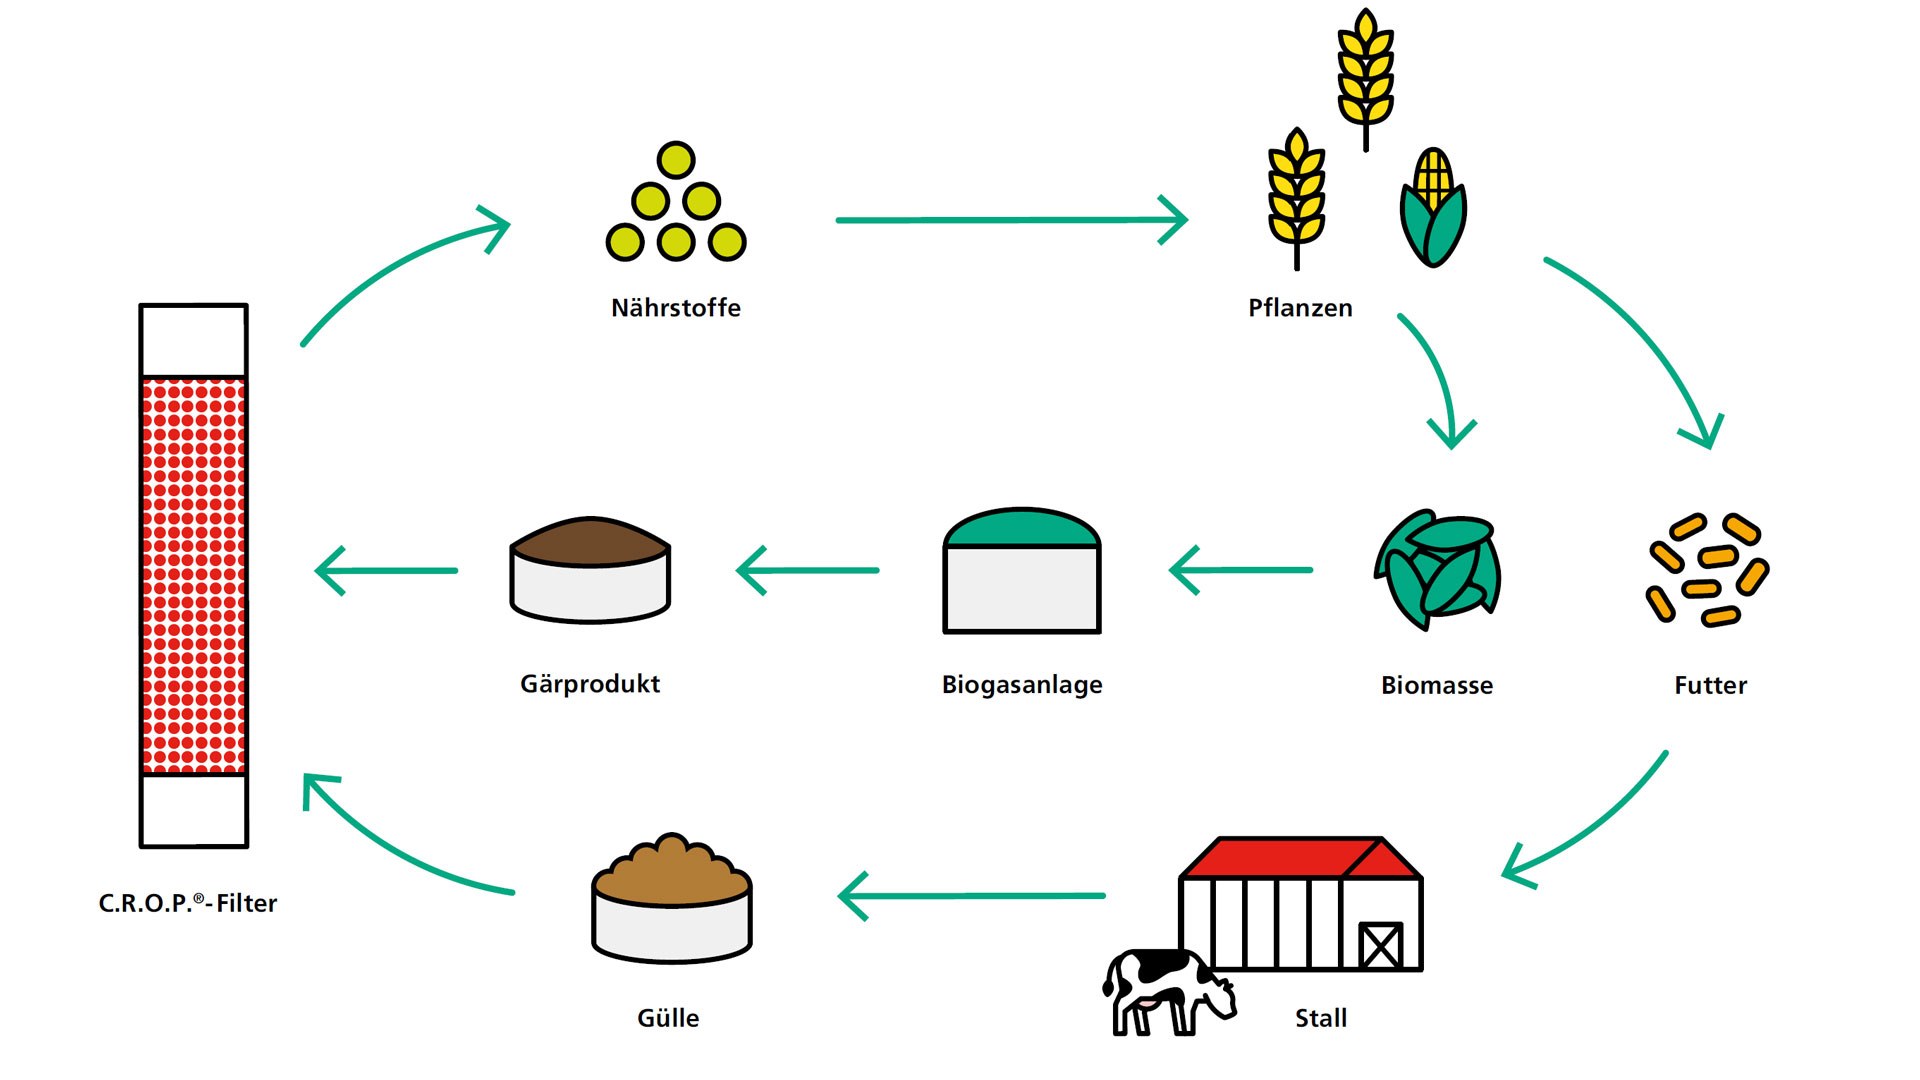 Integration into agricultural cycles